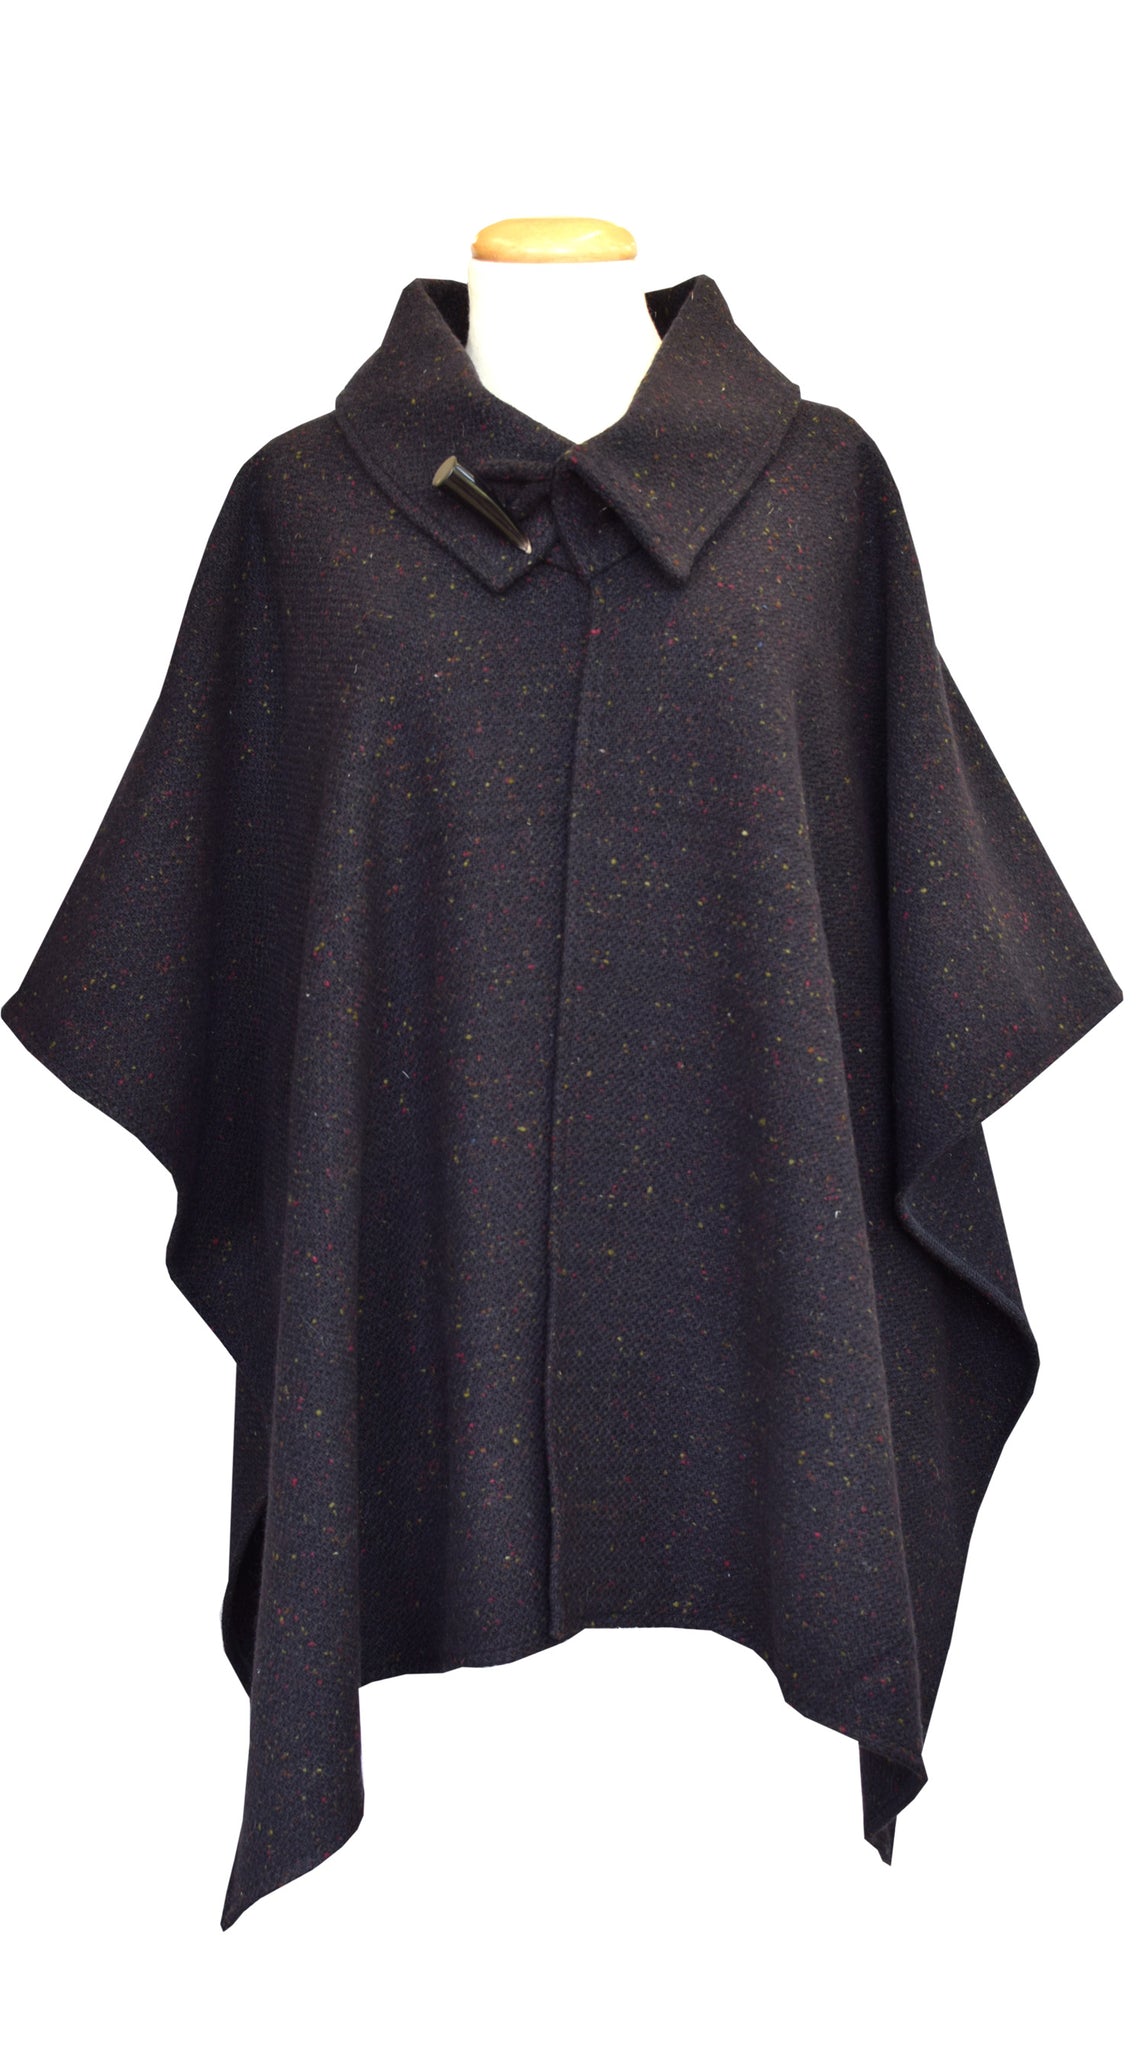 Handwoven Studio Donegal Tweed Cape Toggle – Mary-Anne's Gift Shop